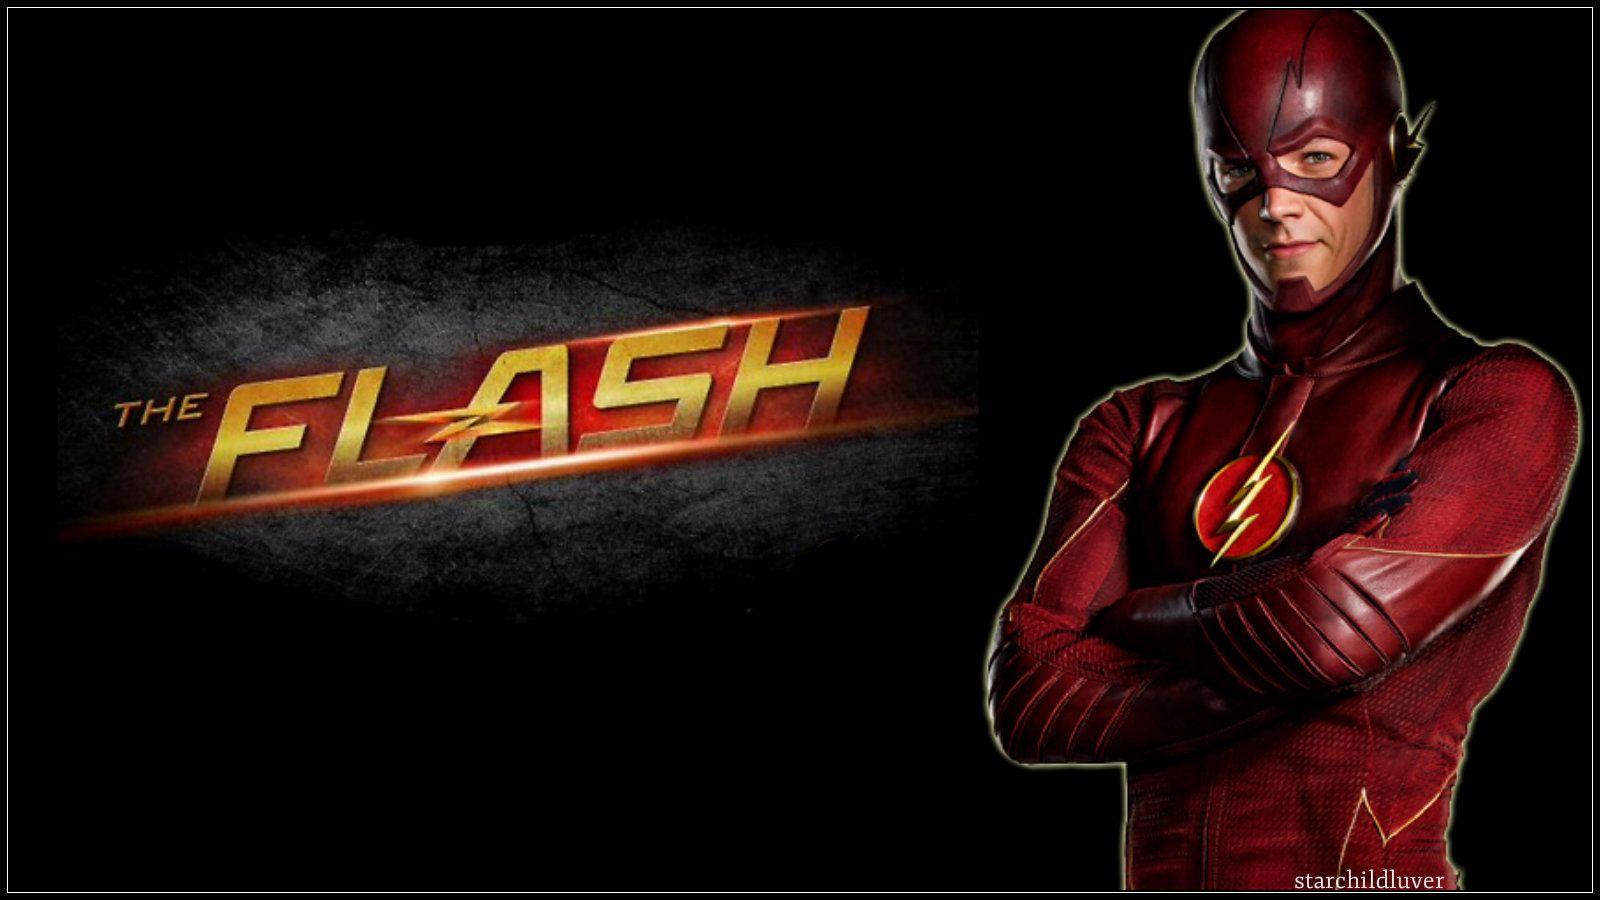 Adorable The Flash Image, The Flash Wallpaper 39 Wallpaper